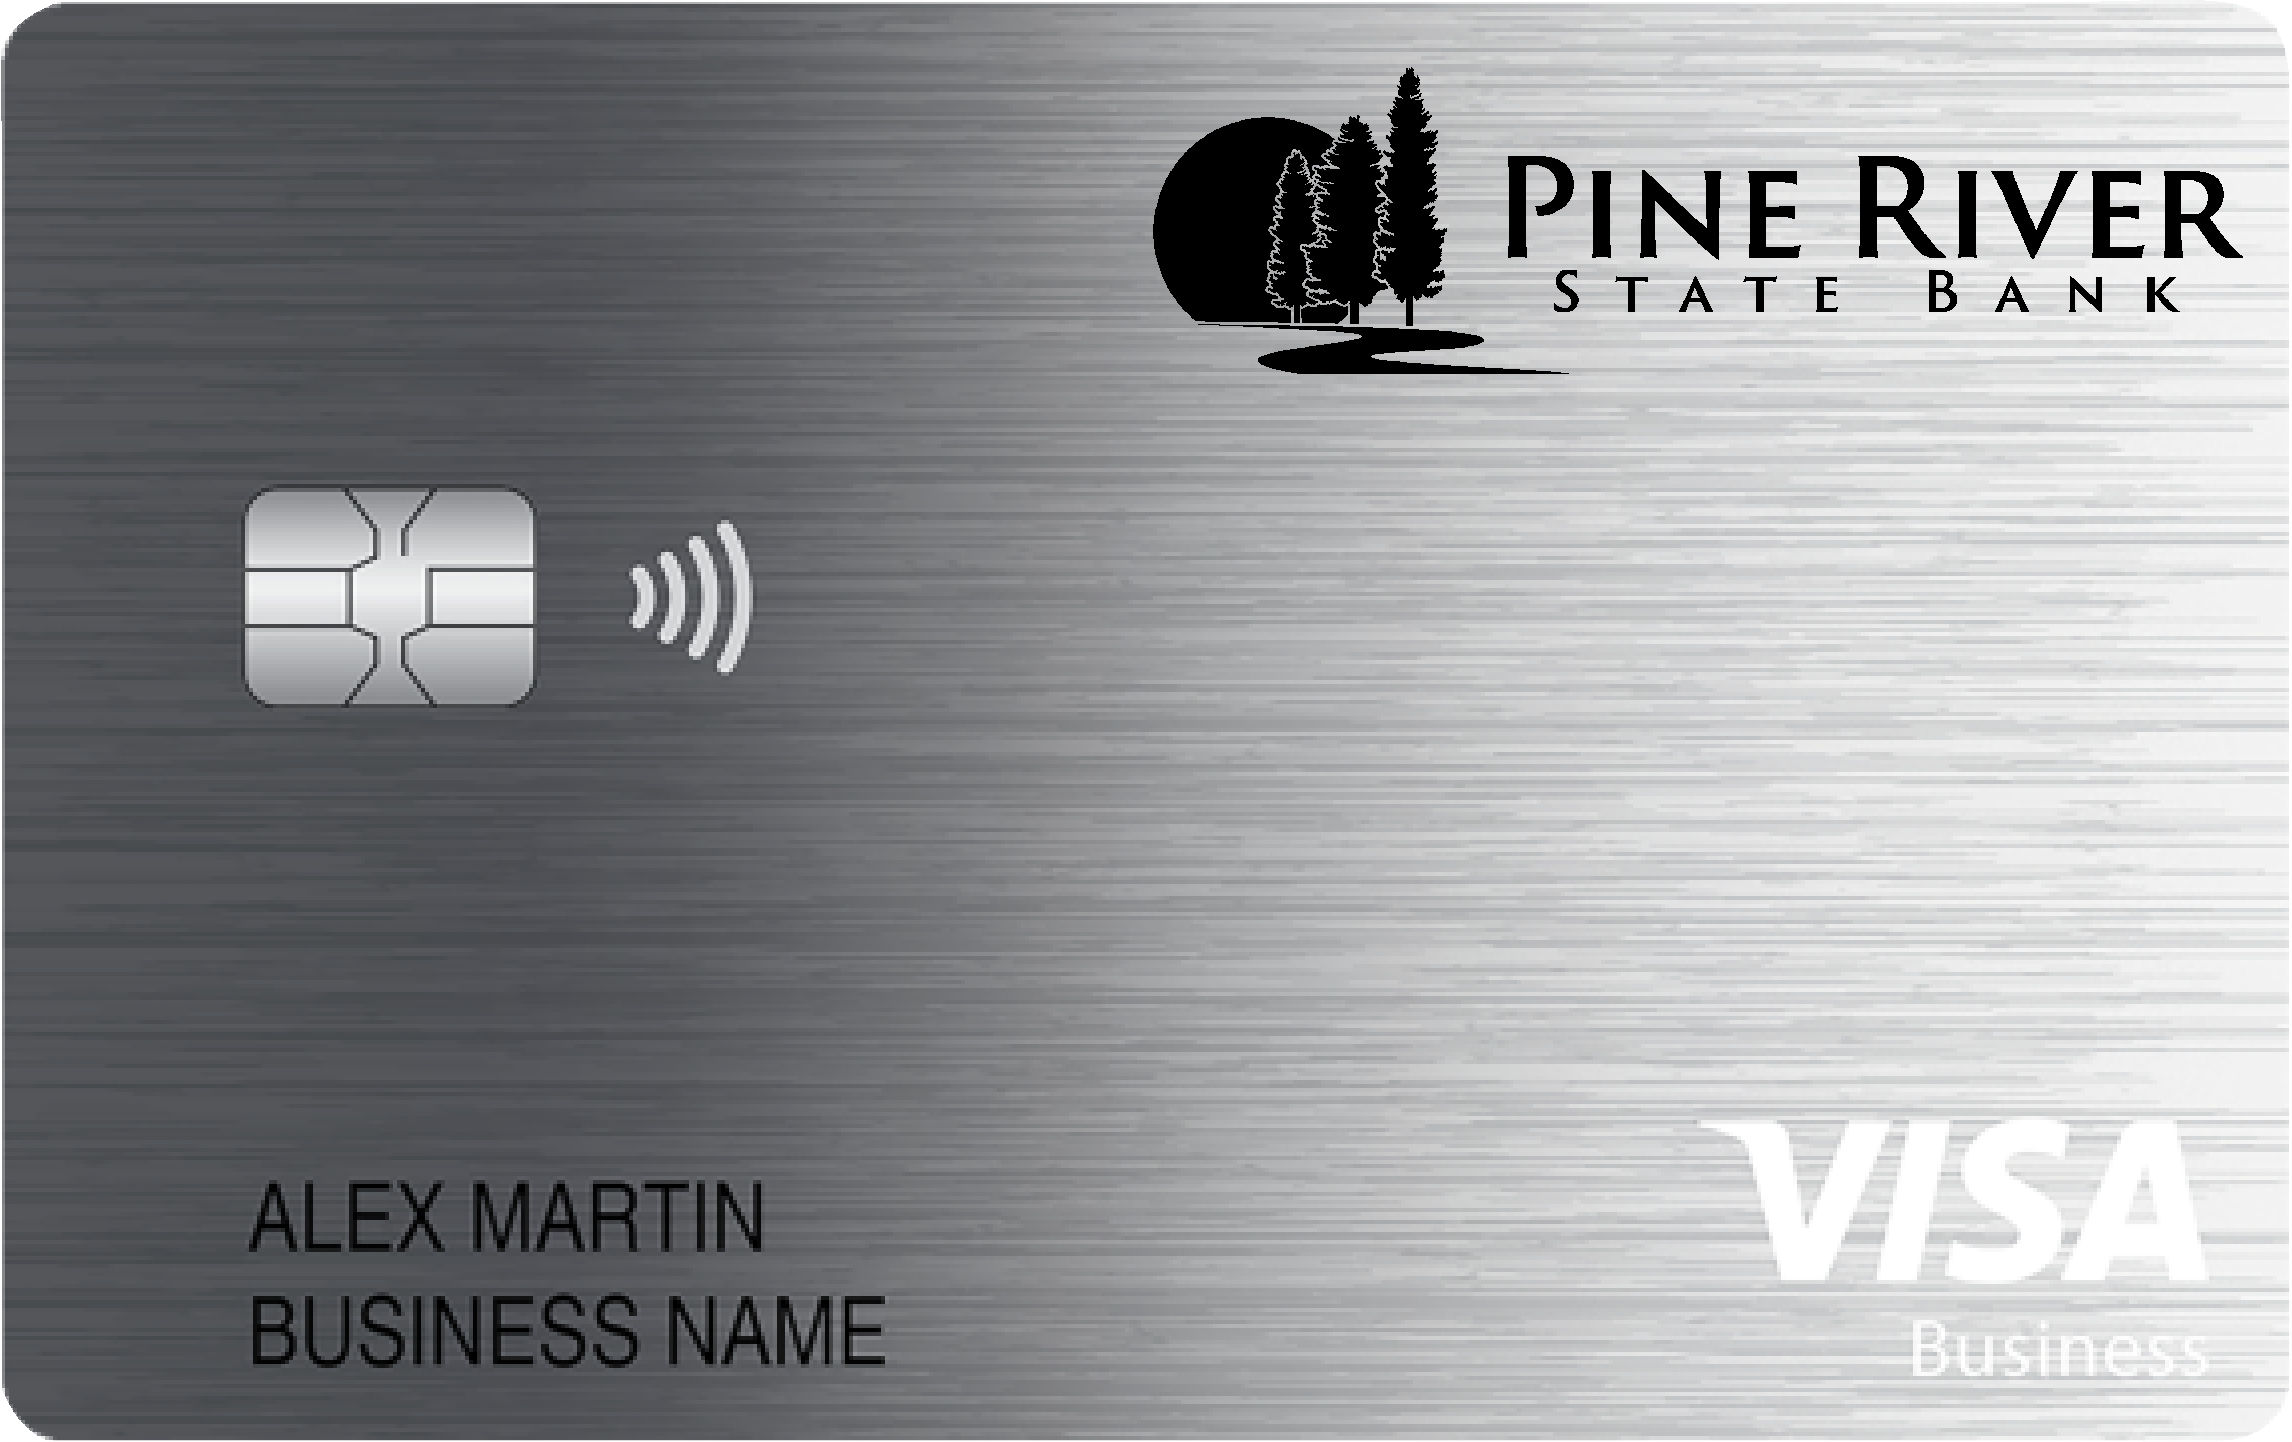 Pine River State Bank Business Real Rewards Card